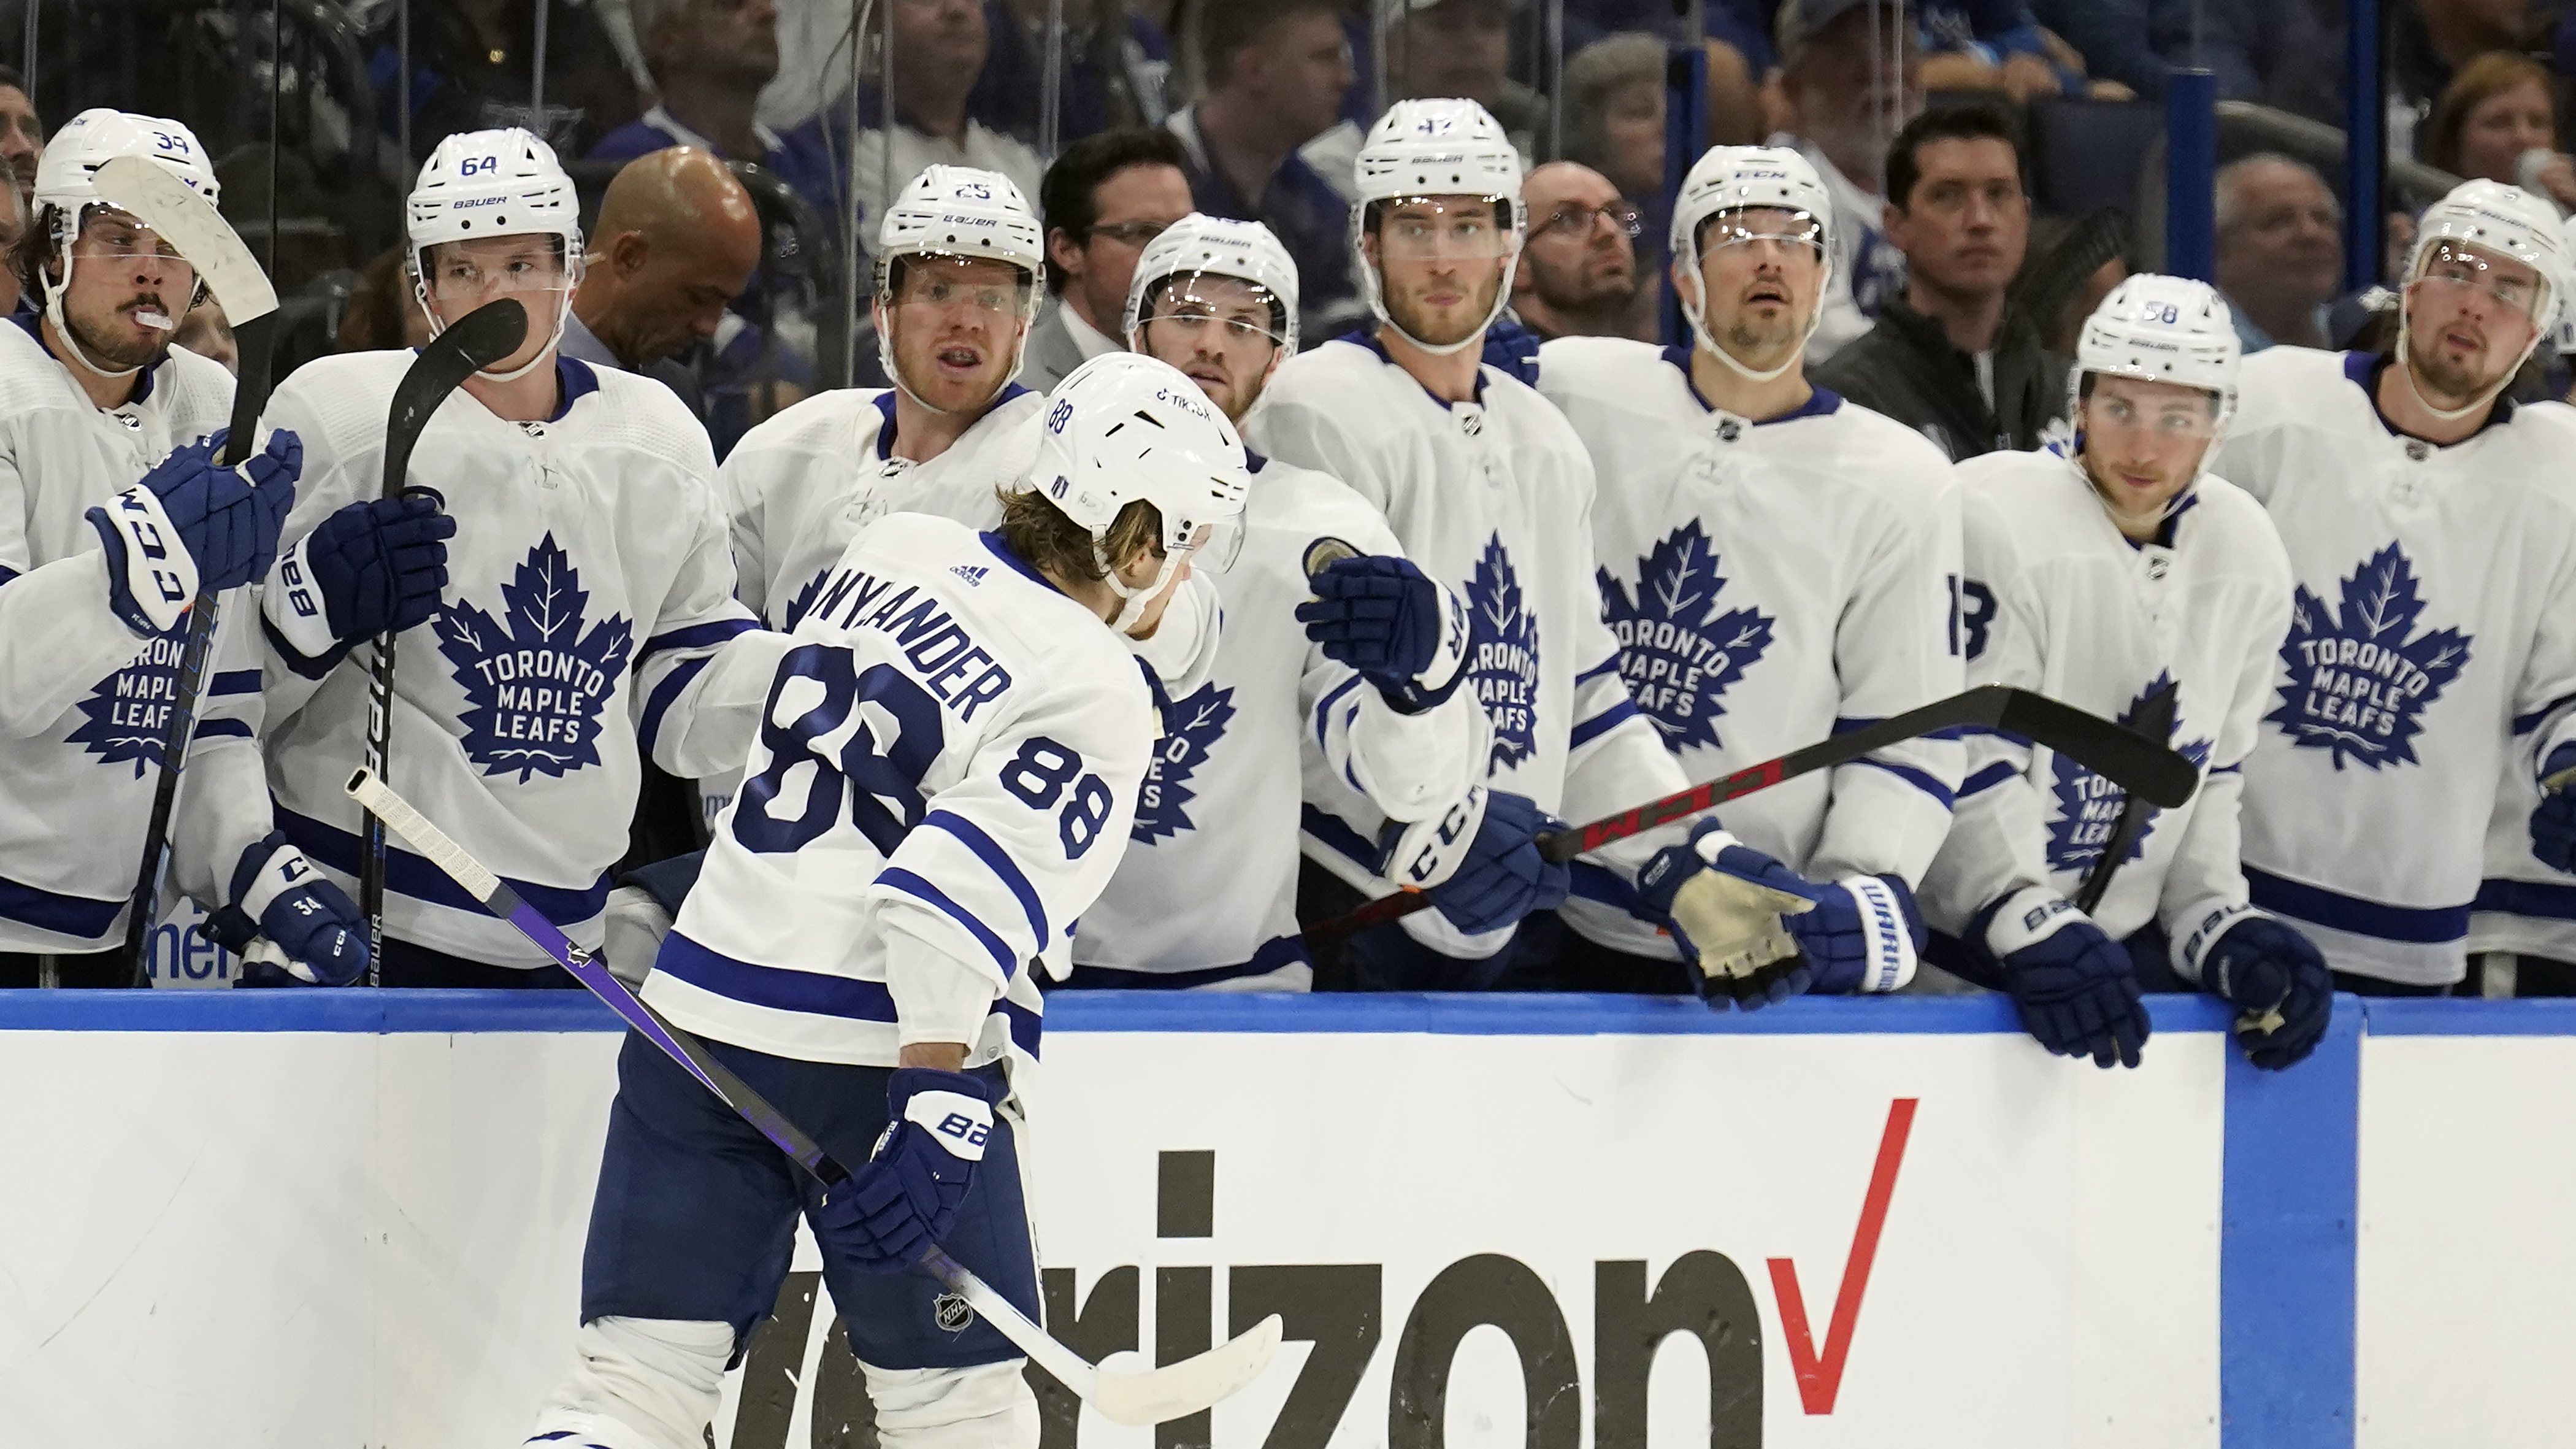 The Toronto Maple Leafs showed off their killer costumes this